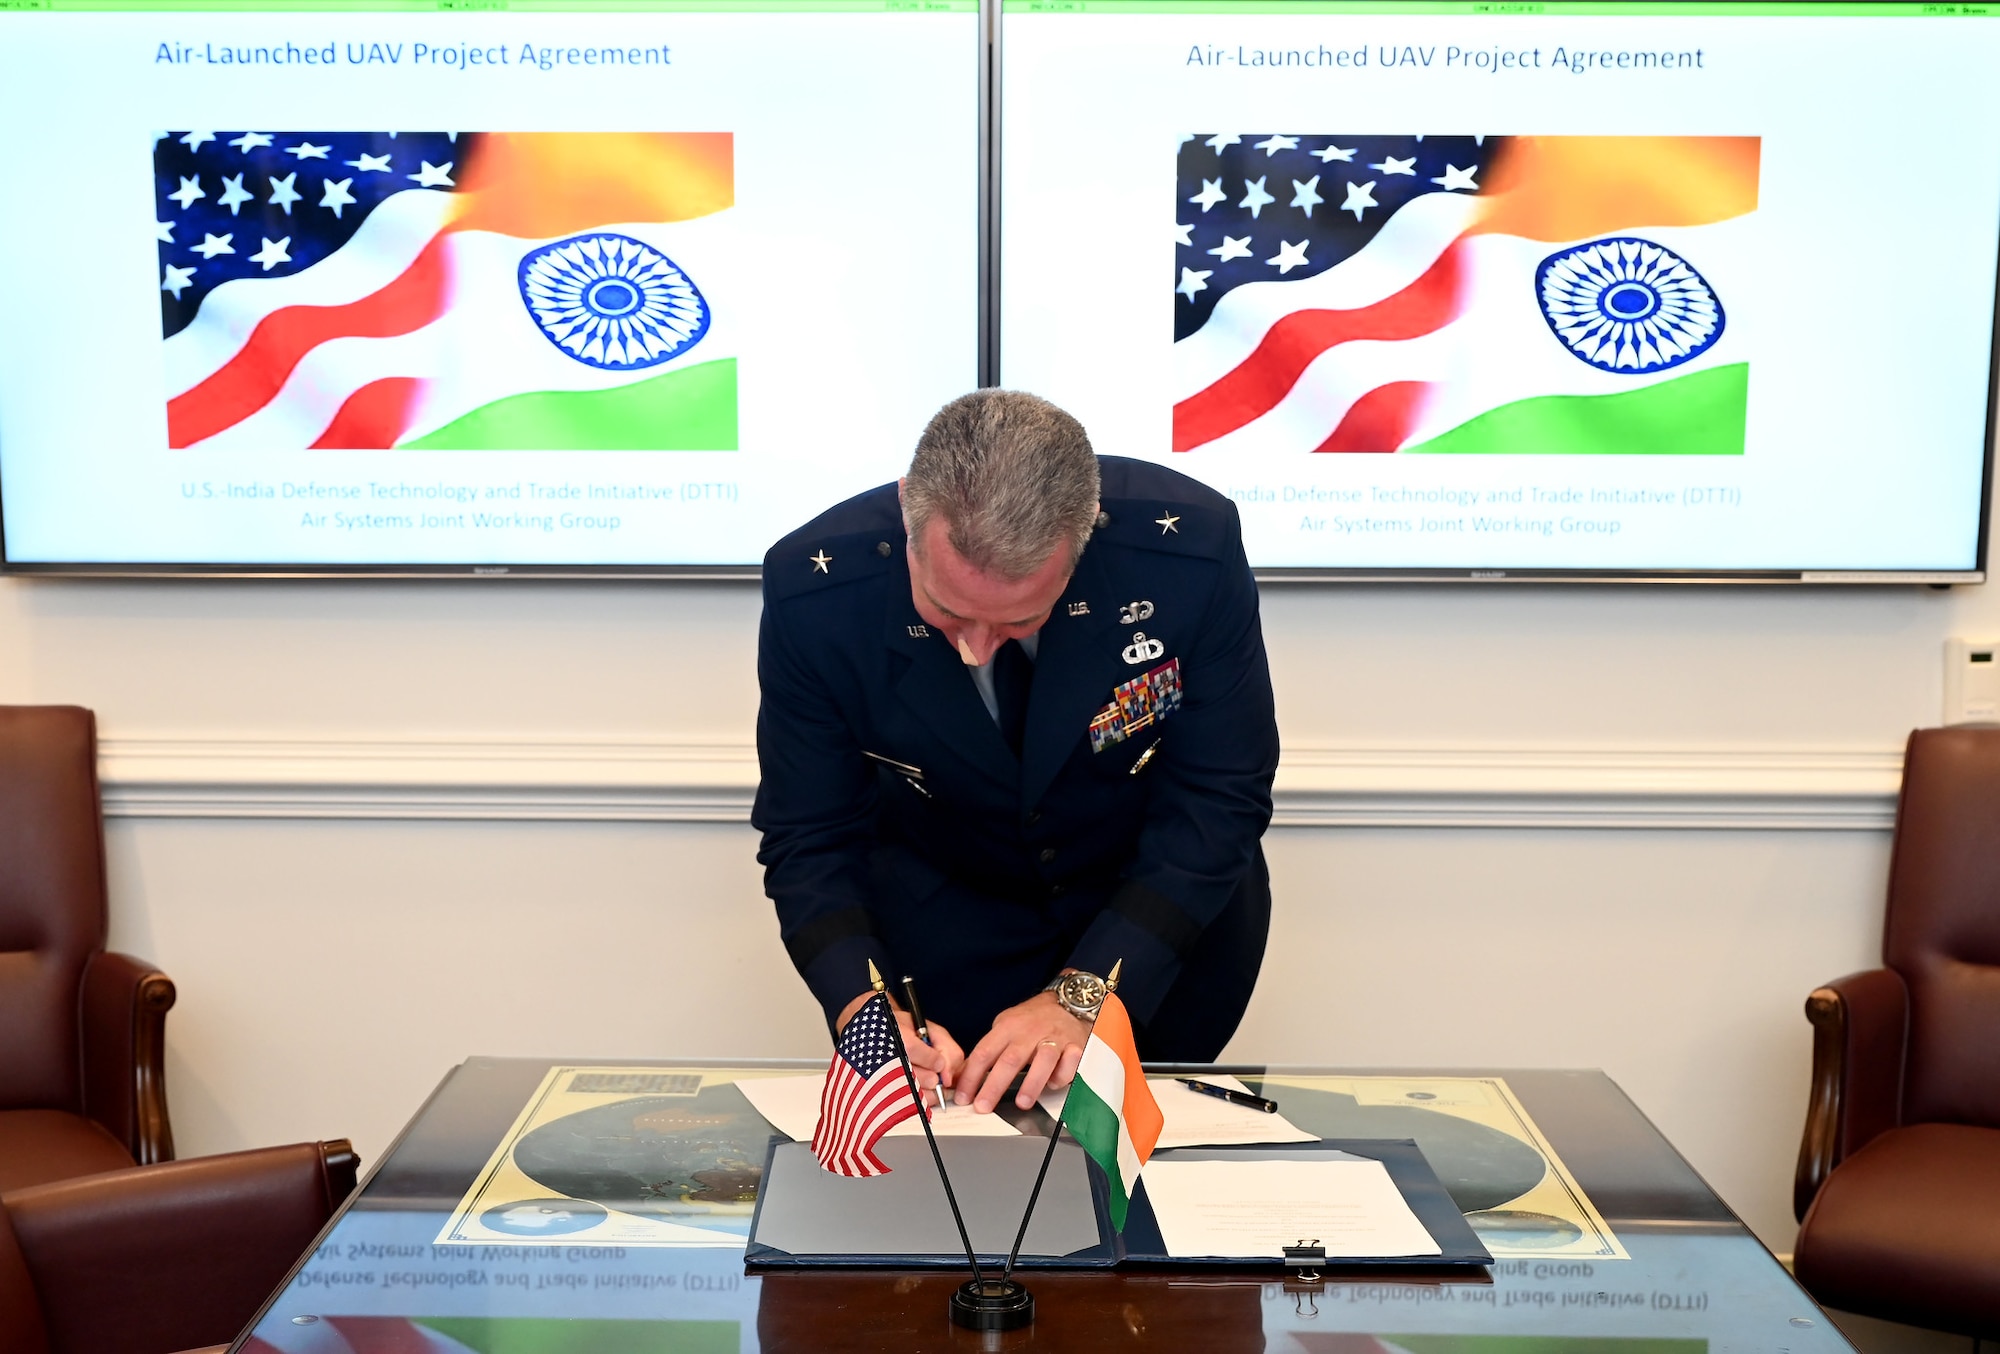 Cochair of the US-India Defense Technology and Trade Initiative, Brig. Gen. Brian Bruckbauer signs the Air Launched UAV Co-Development Agreement at the Pentagon, Arlington, Va., July 16, 2021. (U.S. Air Force photo by Andy Morataya)